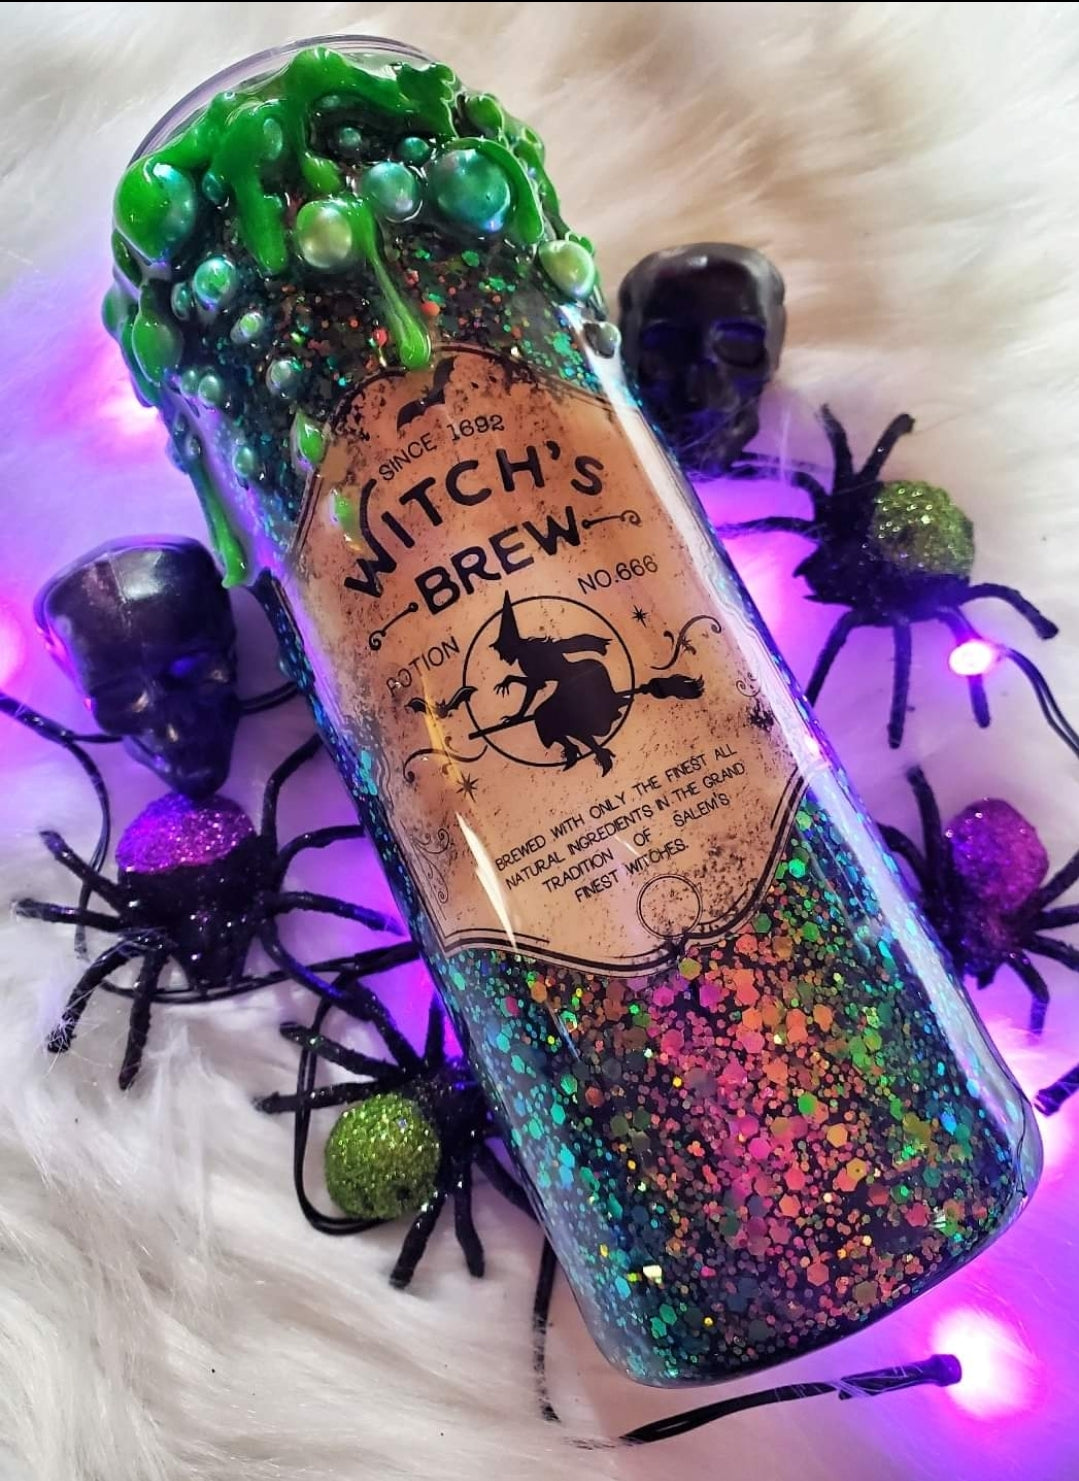 25 oz Witches brew with drip epoxy tumbler – moojesticcreations